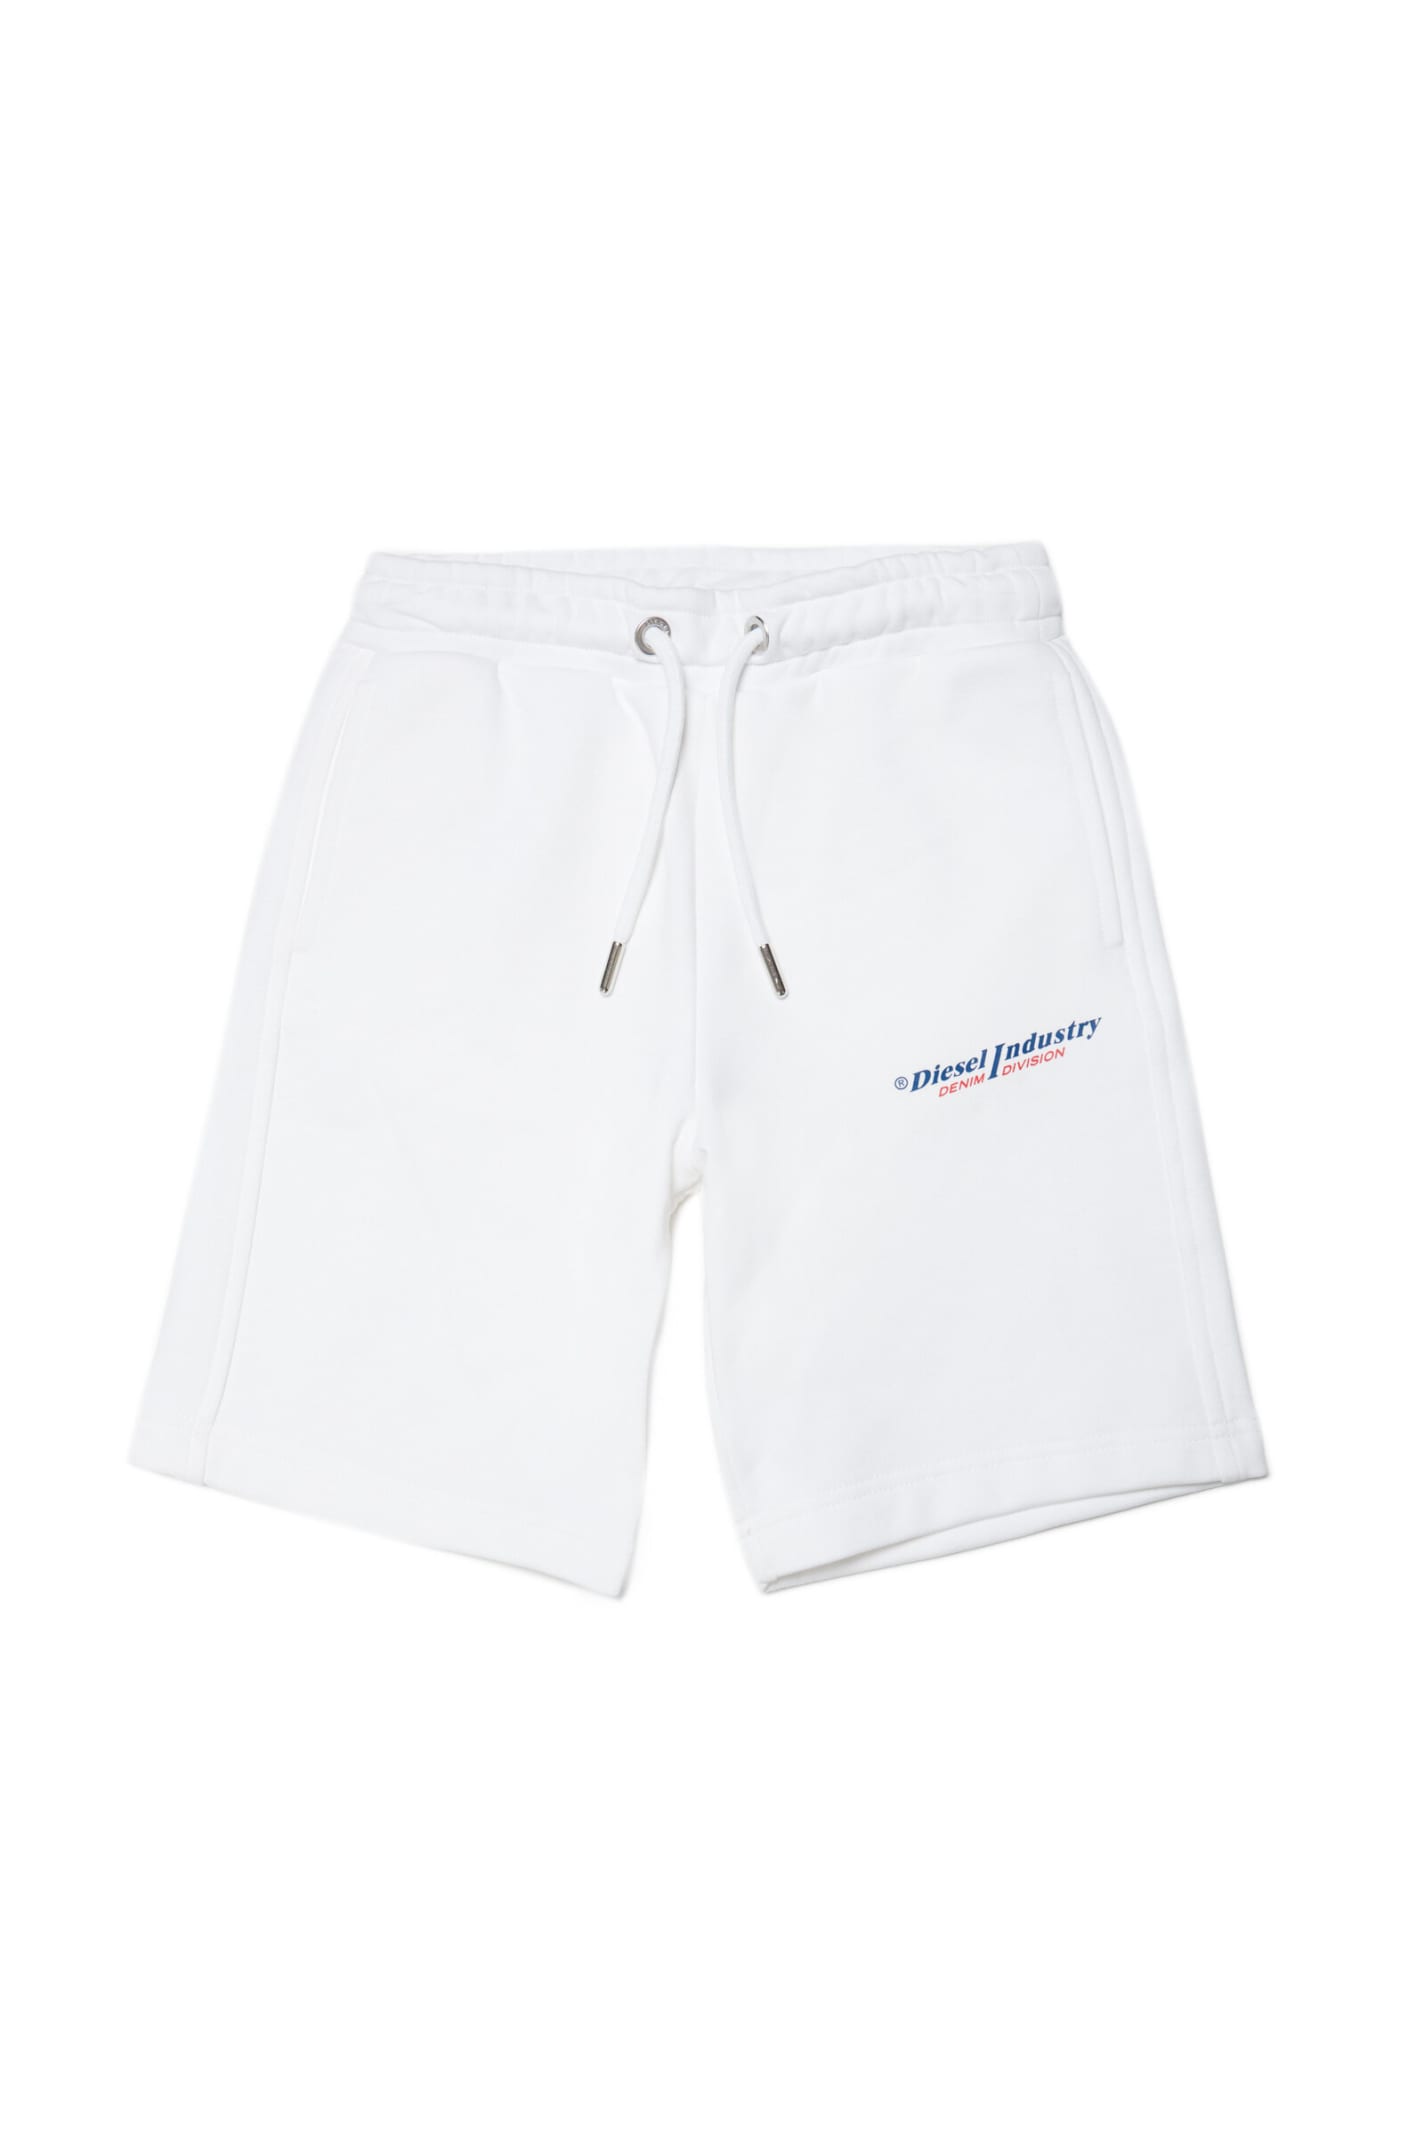 DIESEL PDADOIND SHORTS DIESEL WHITE COTTON SHORTS WITH LOGO AND DRAWSTRING WAISTBAND